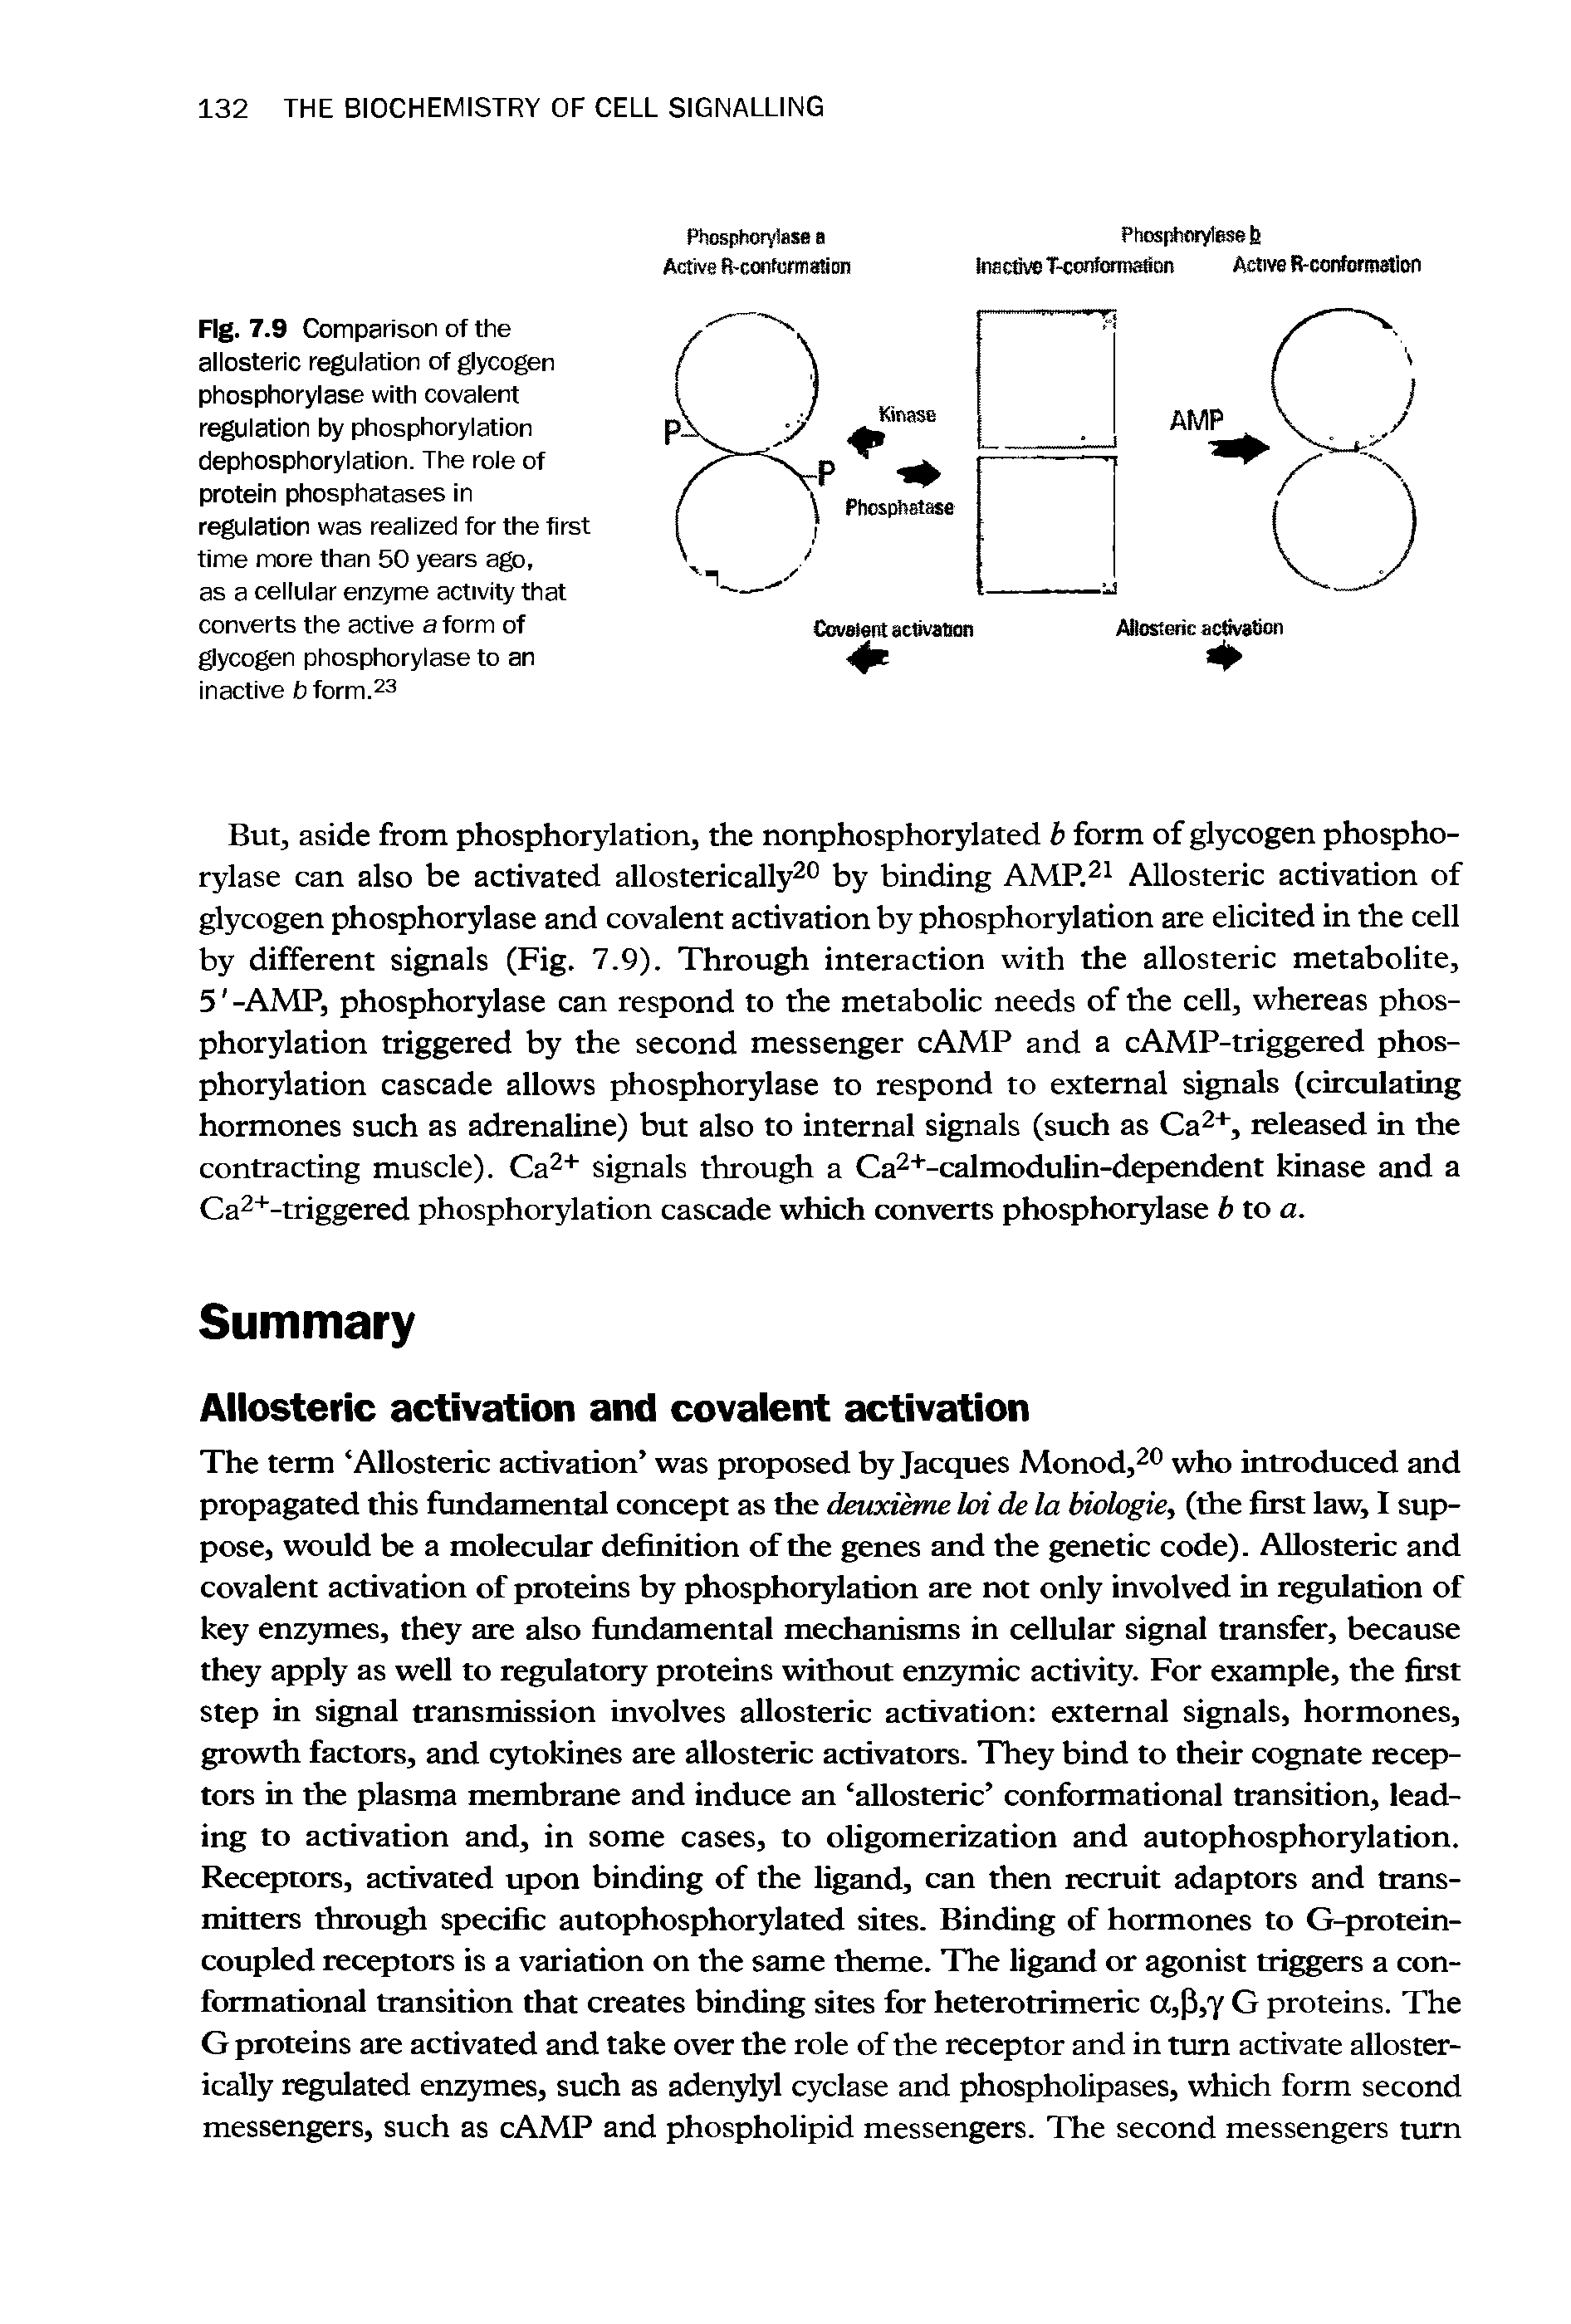 Fig. 7.9 Comparison of the allosteric regulation of gycogen phosphorylase with covalent regulation by phosphorylation dephosphorylation. The role of protein phosphatases in regulation was realized for the first time more than 50 years ago, as a cellular enzyme activity that converts the active a form of glycogen phosphorylase to an inactive b form.23...